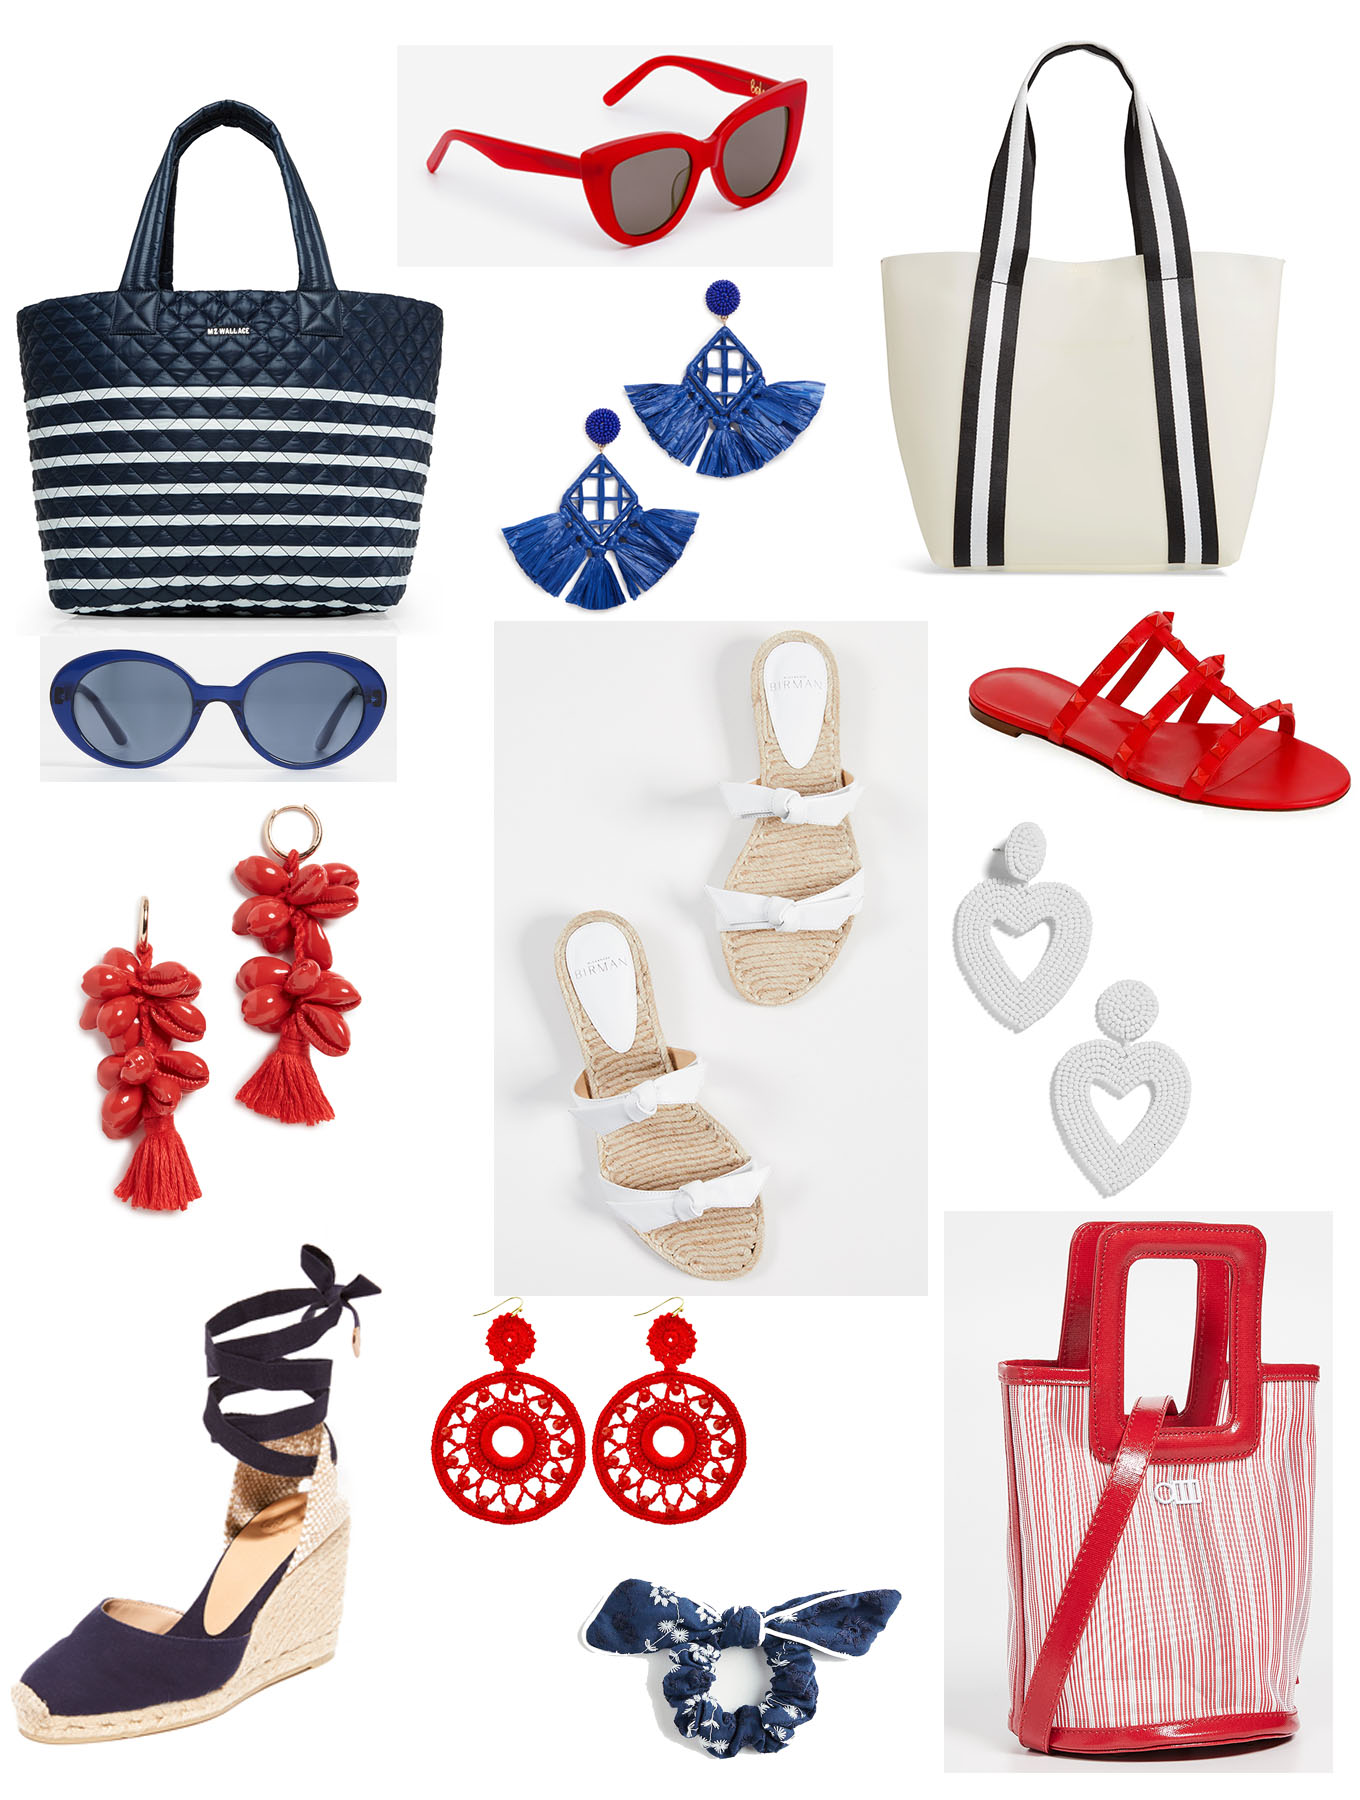 July 4th is fast approaching! Add a little or a lot of red, white and blue accessories to add punch and a patriotic touch to your look!